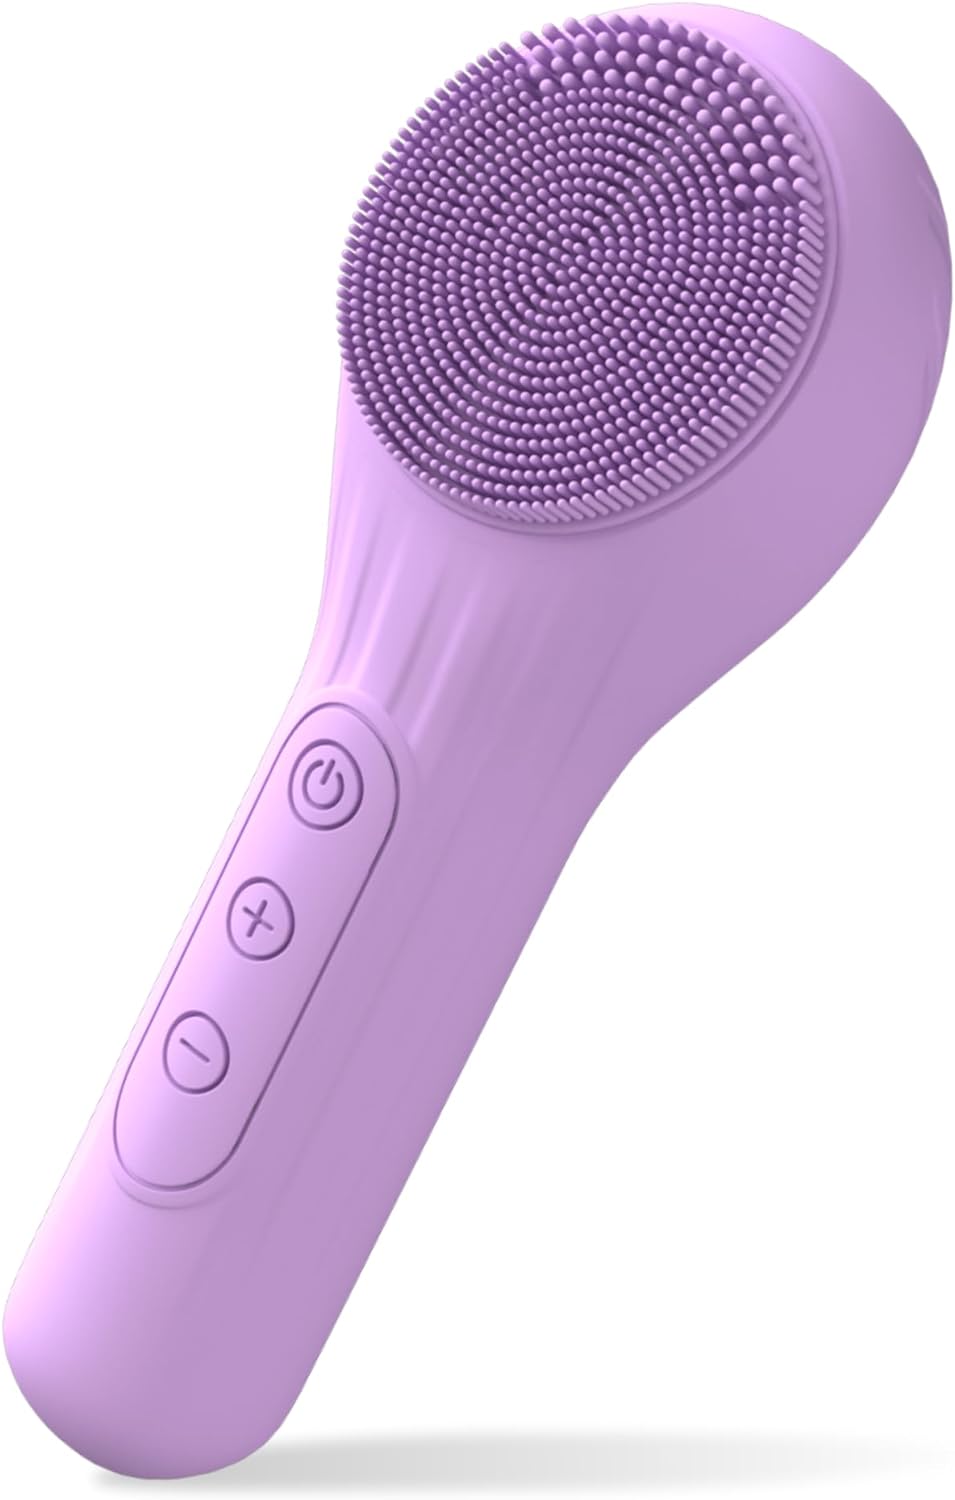 Bealux Sonic Facial Cleansing Brush - Purple - Silicone Face Scrubber for Women and Men - Rechargeable Face Cleansing Brush - Electric Face Brush Cleanser - Facial Brush Skin Cleansing and Exfoliating